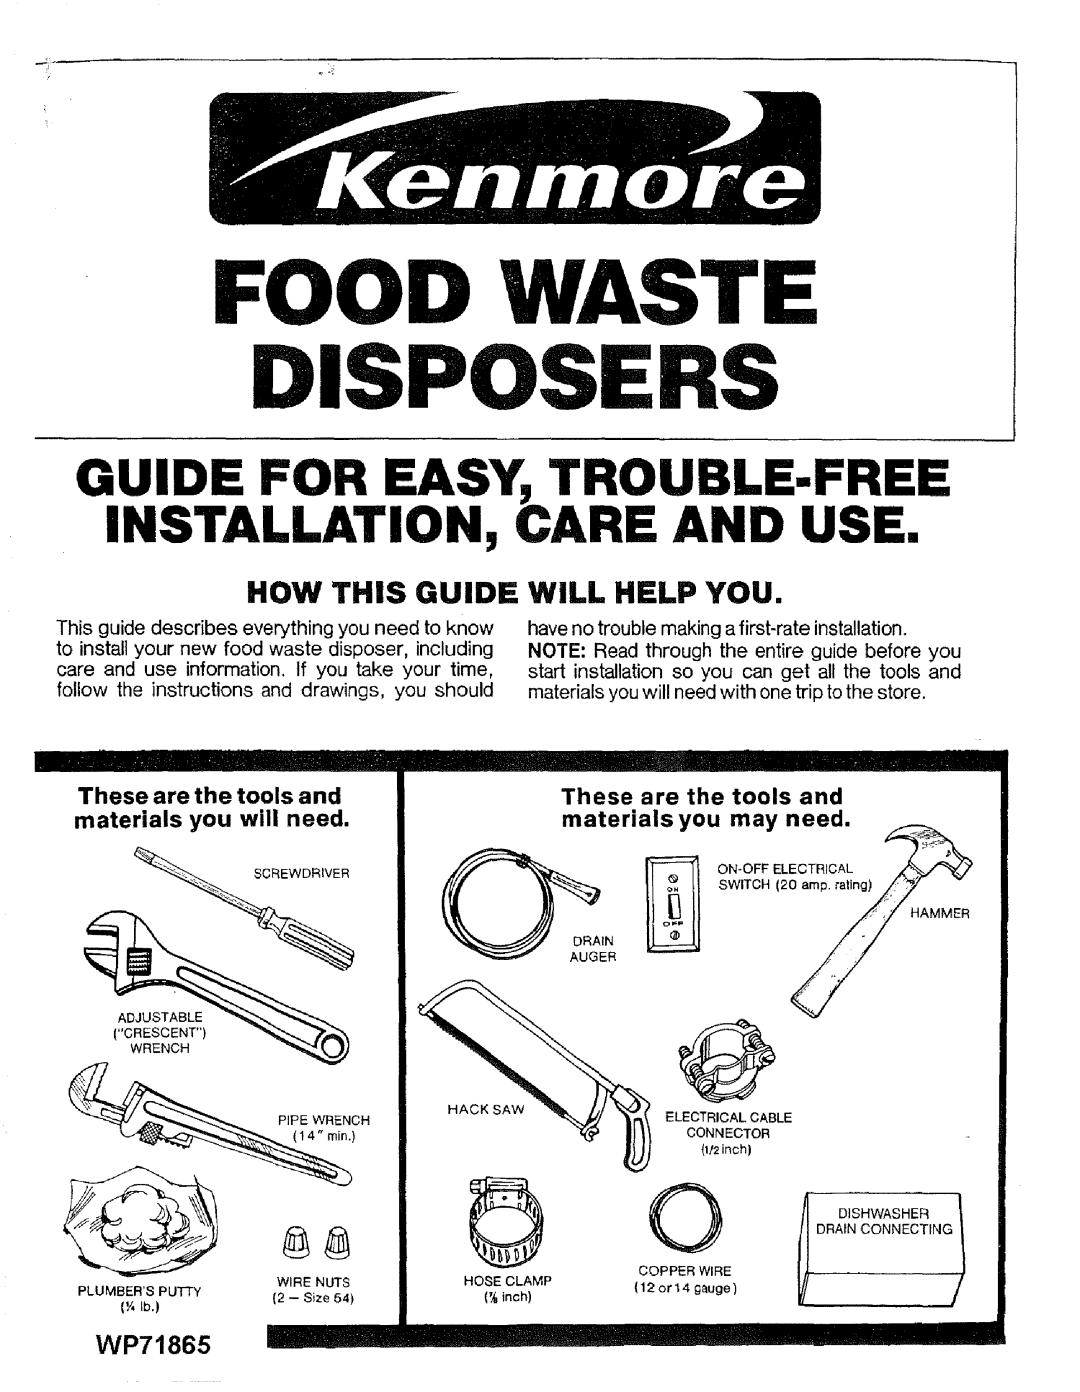 Kenmore 17568563 manual Guide For Easy, Trouble-Free, Installation, Care And Use, How This Guide Will Help You, I I! II!1 